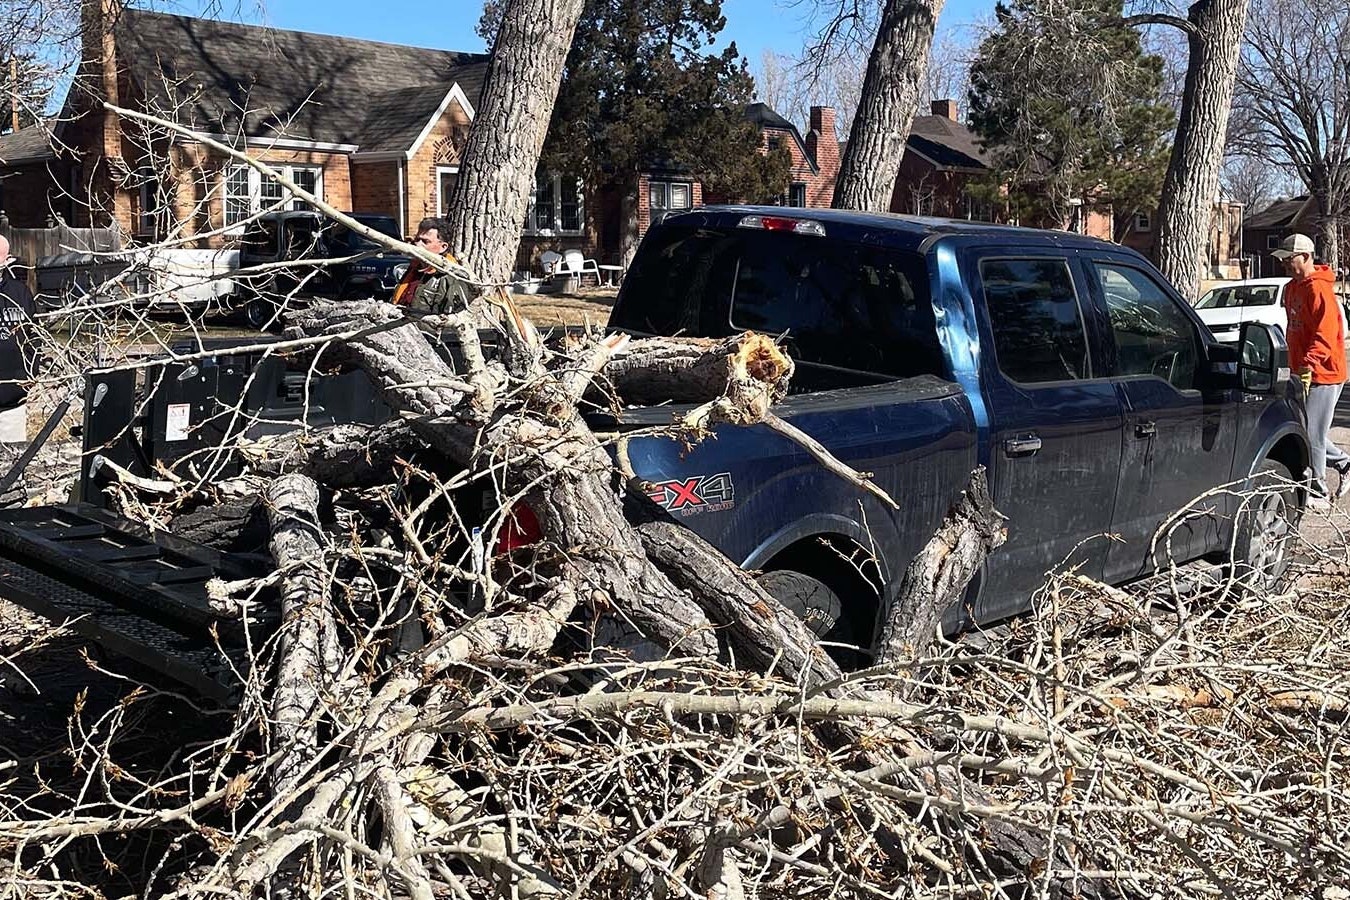 Not even the weatherman is exempt from the effects of Wyoming weather. This past weekend's wind storms dropped a large chunk of a giant cottonwood on his truck.